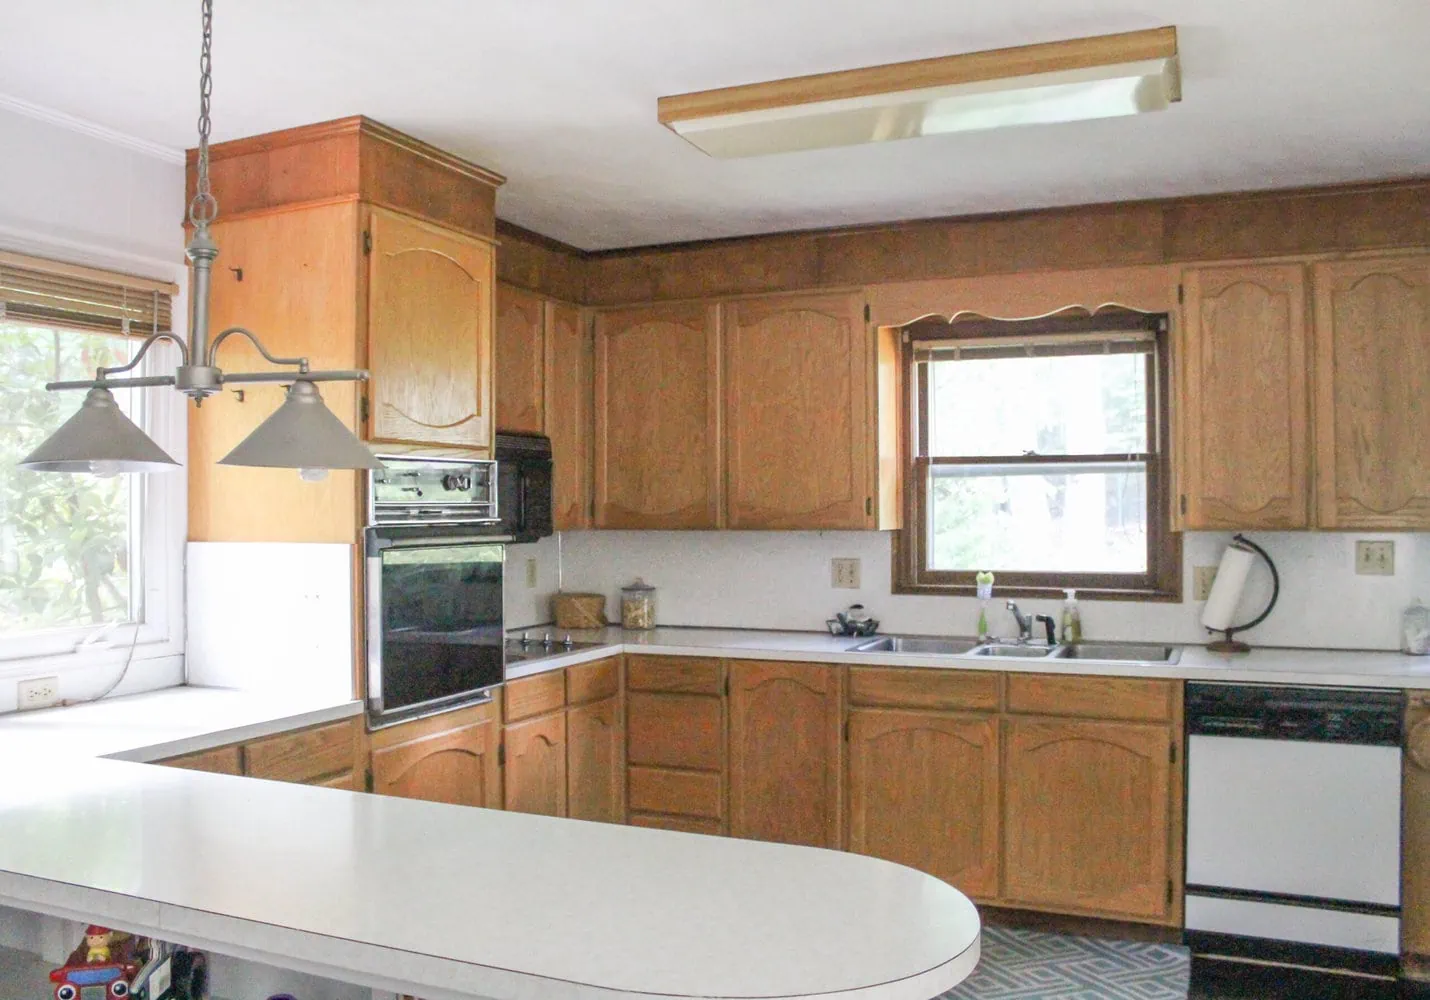 outdated kitchen with oak cabinets and laminate countertops.